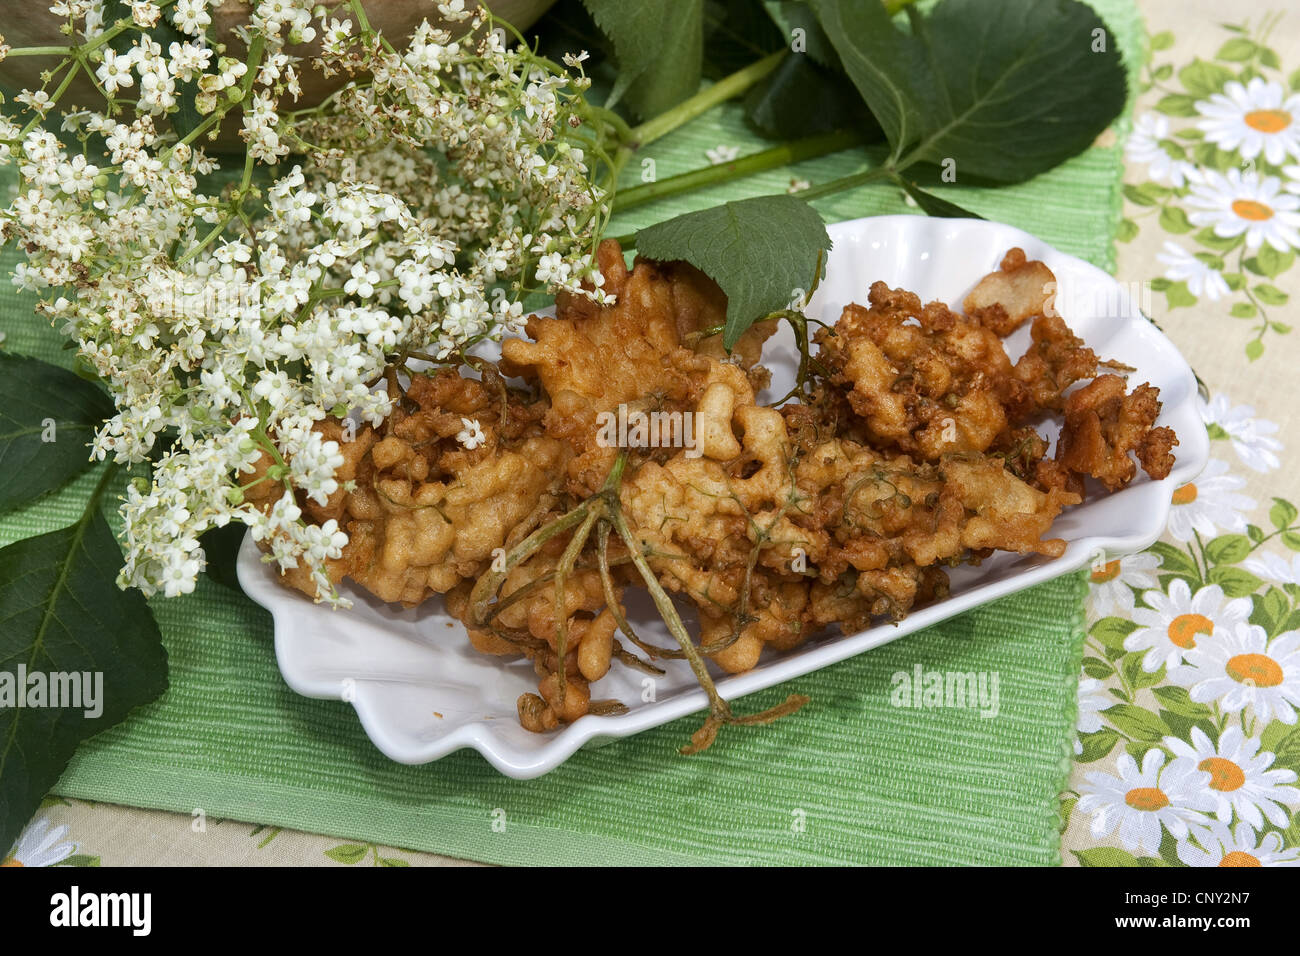 European black elder, Elderberry, Common elder (Sambucus nigra), inflorescence dipped into batter and deep-fried are served in a porcelain dish, Germany Stock Photo